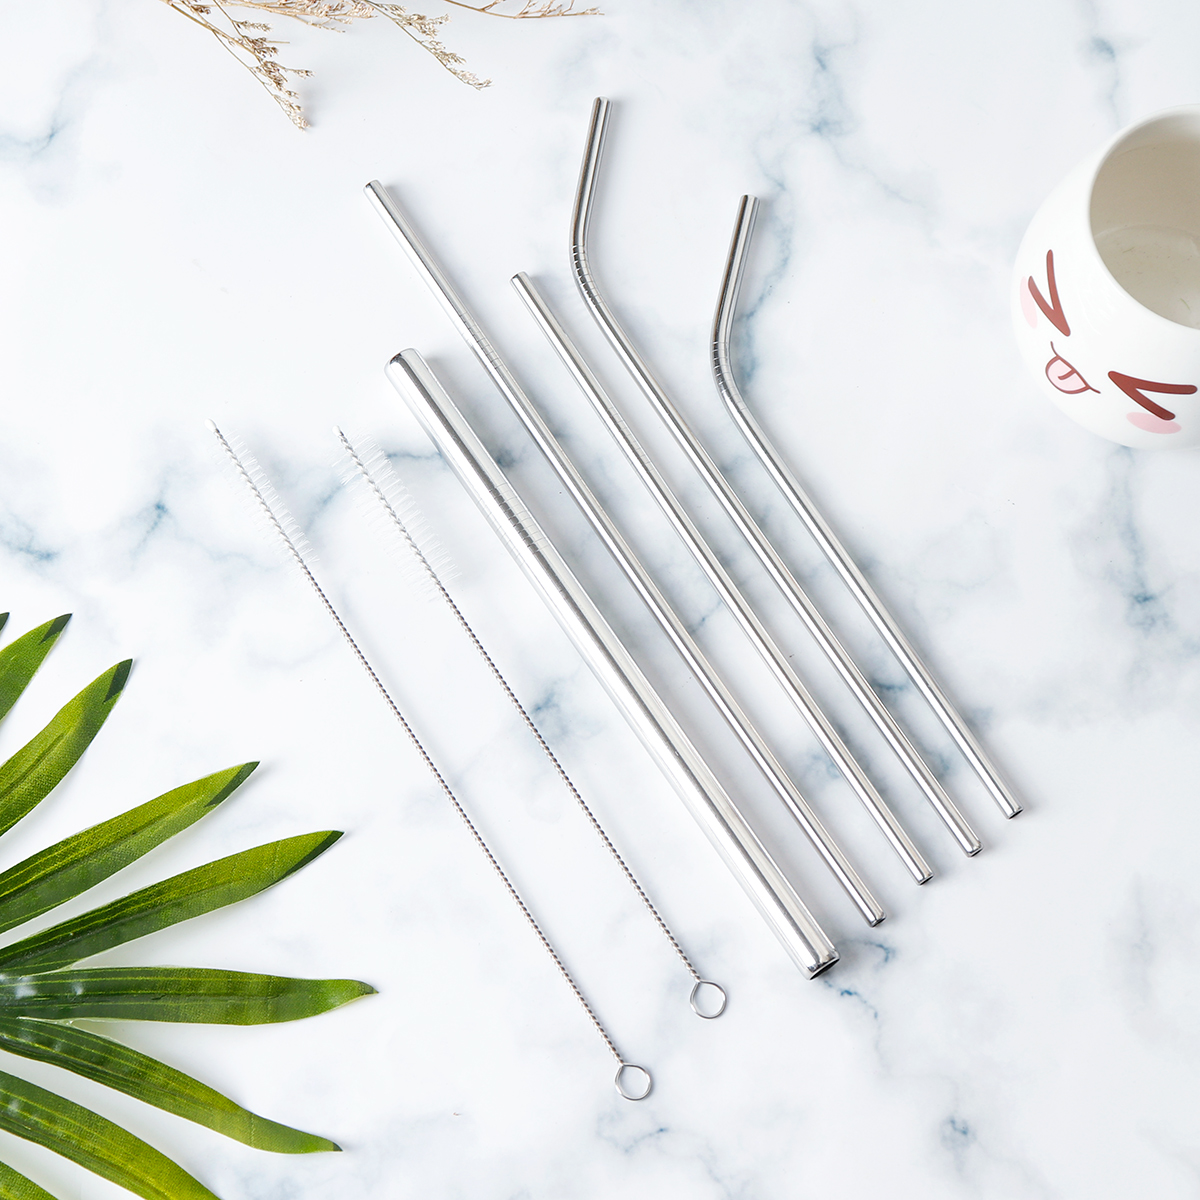 Portable-Metal-Straw-Set-304-Stainless-Steel-Straws-Reusable-Metal-Drinking-Straws-With-Cleaning-Bru-1532046-4